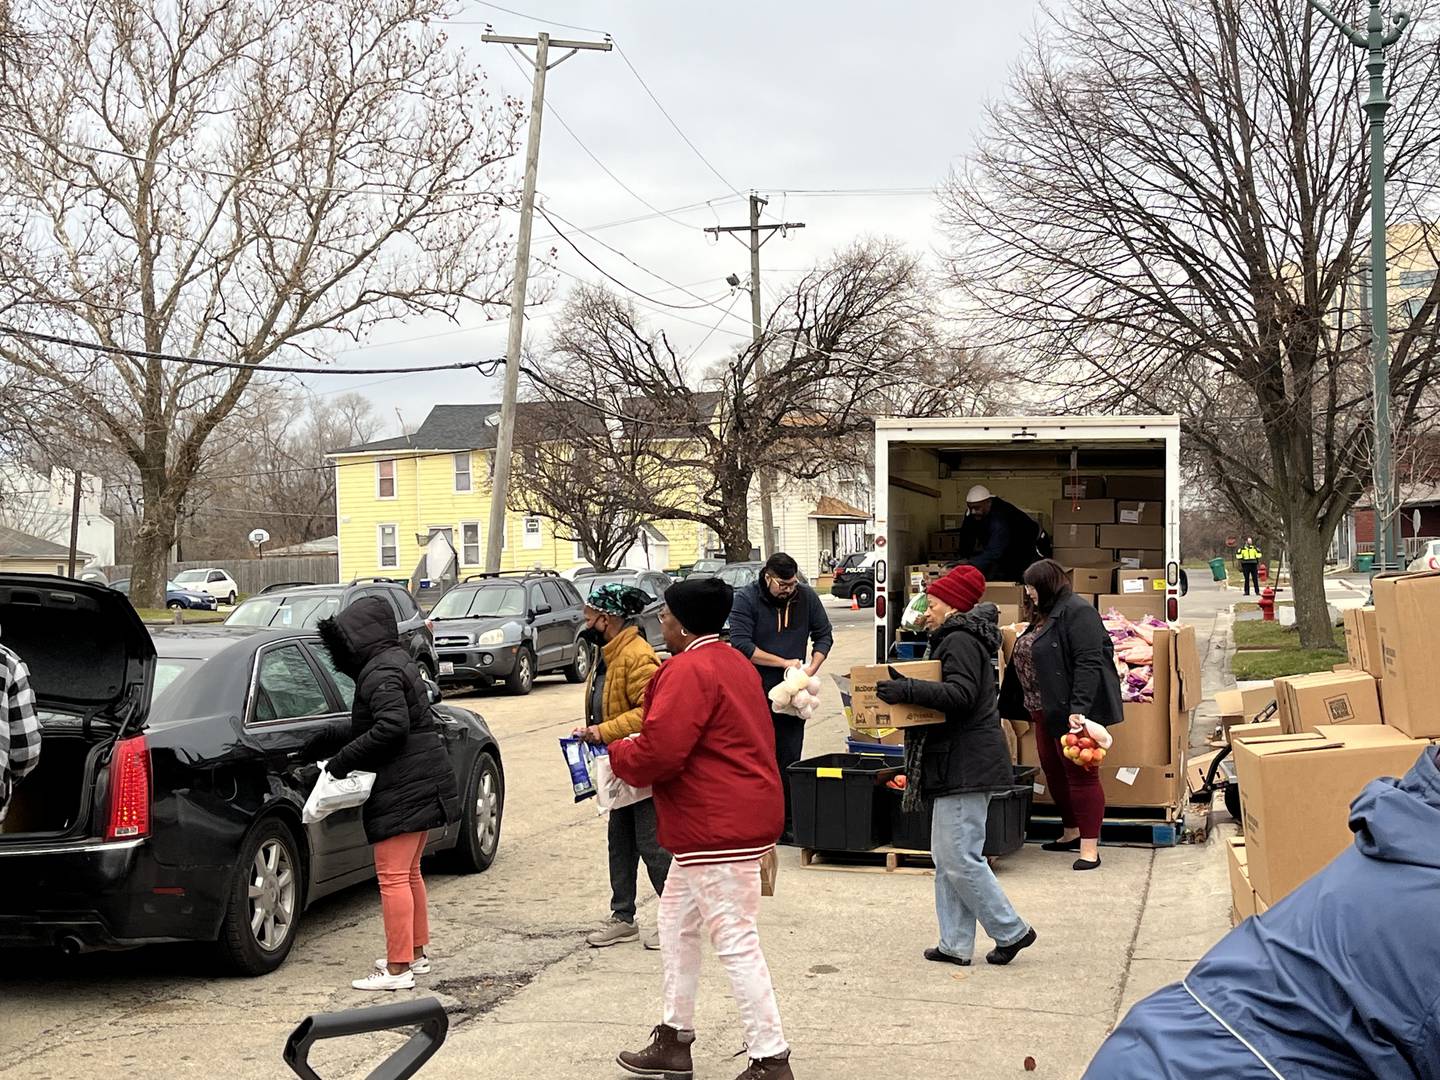 Volunteers bring food to one of numerous vehicles that arrived for a free food pantry event on Thursday, Dec. 21, near Second Baptist Church in Joliet.